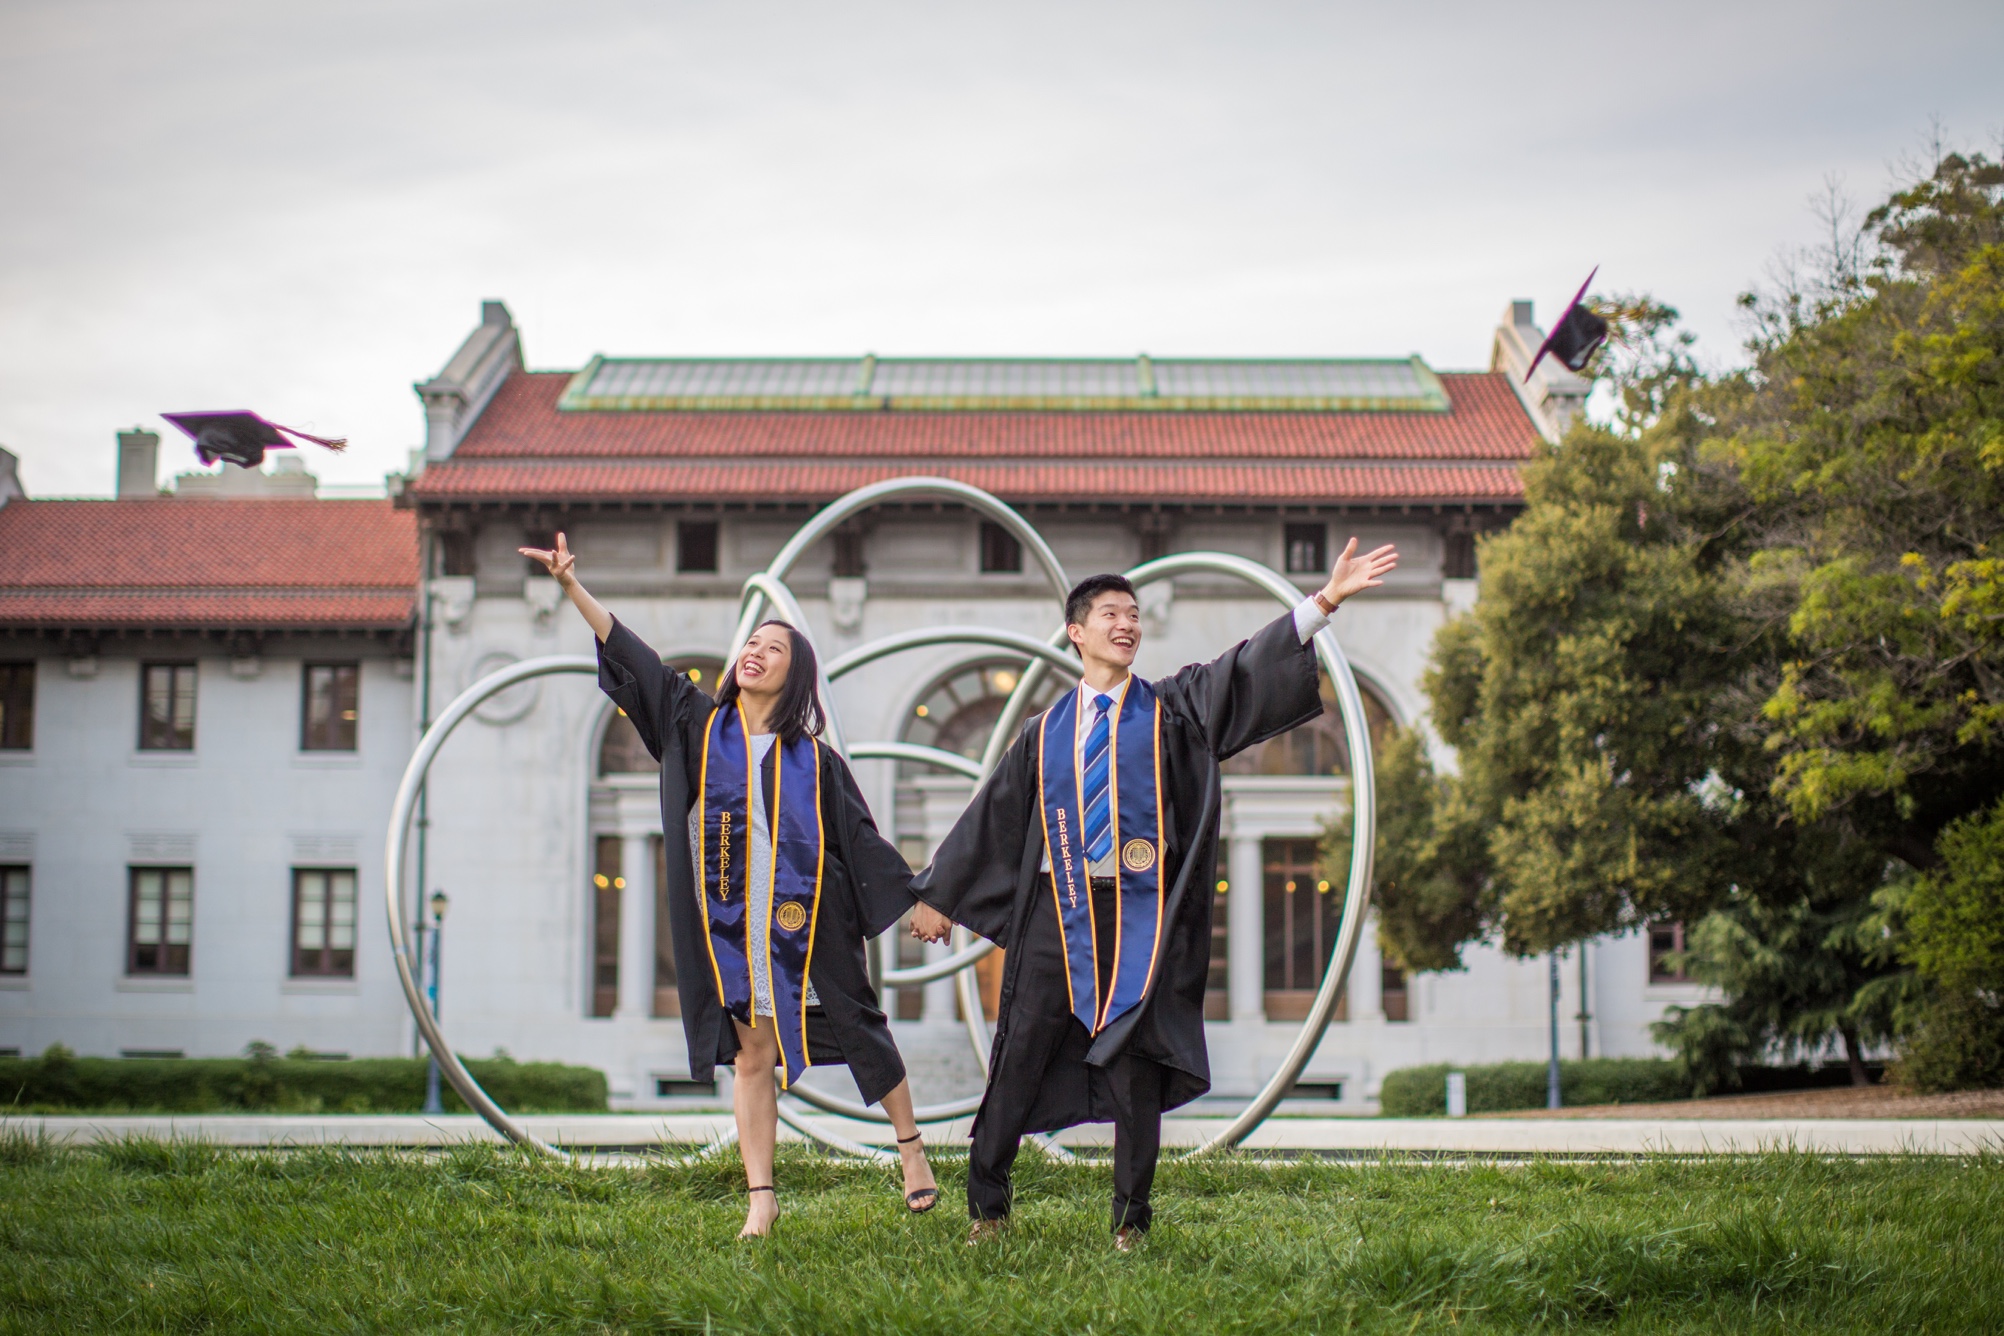 Photo of Crystal and Robert in graduation regalia throwing their caps in the air in front of 